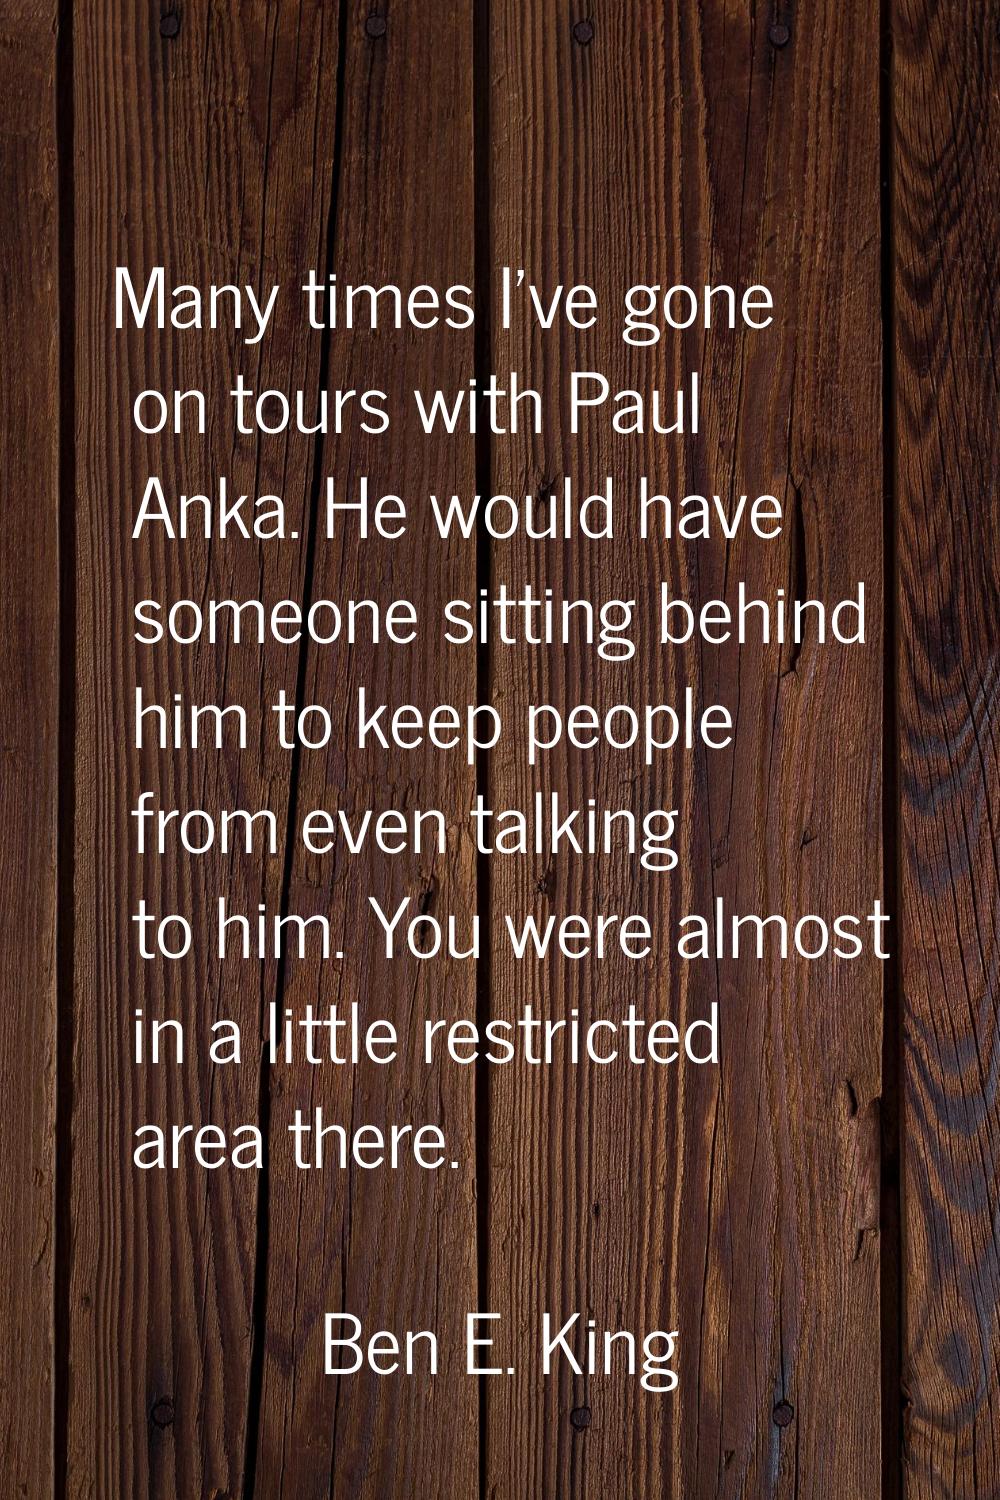 Many times I've gone on tours with Paul Anka. He would have someone sitting behind him to keep peop